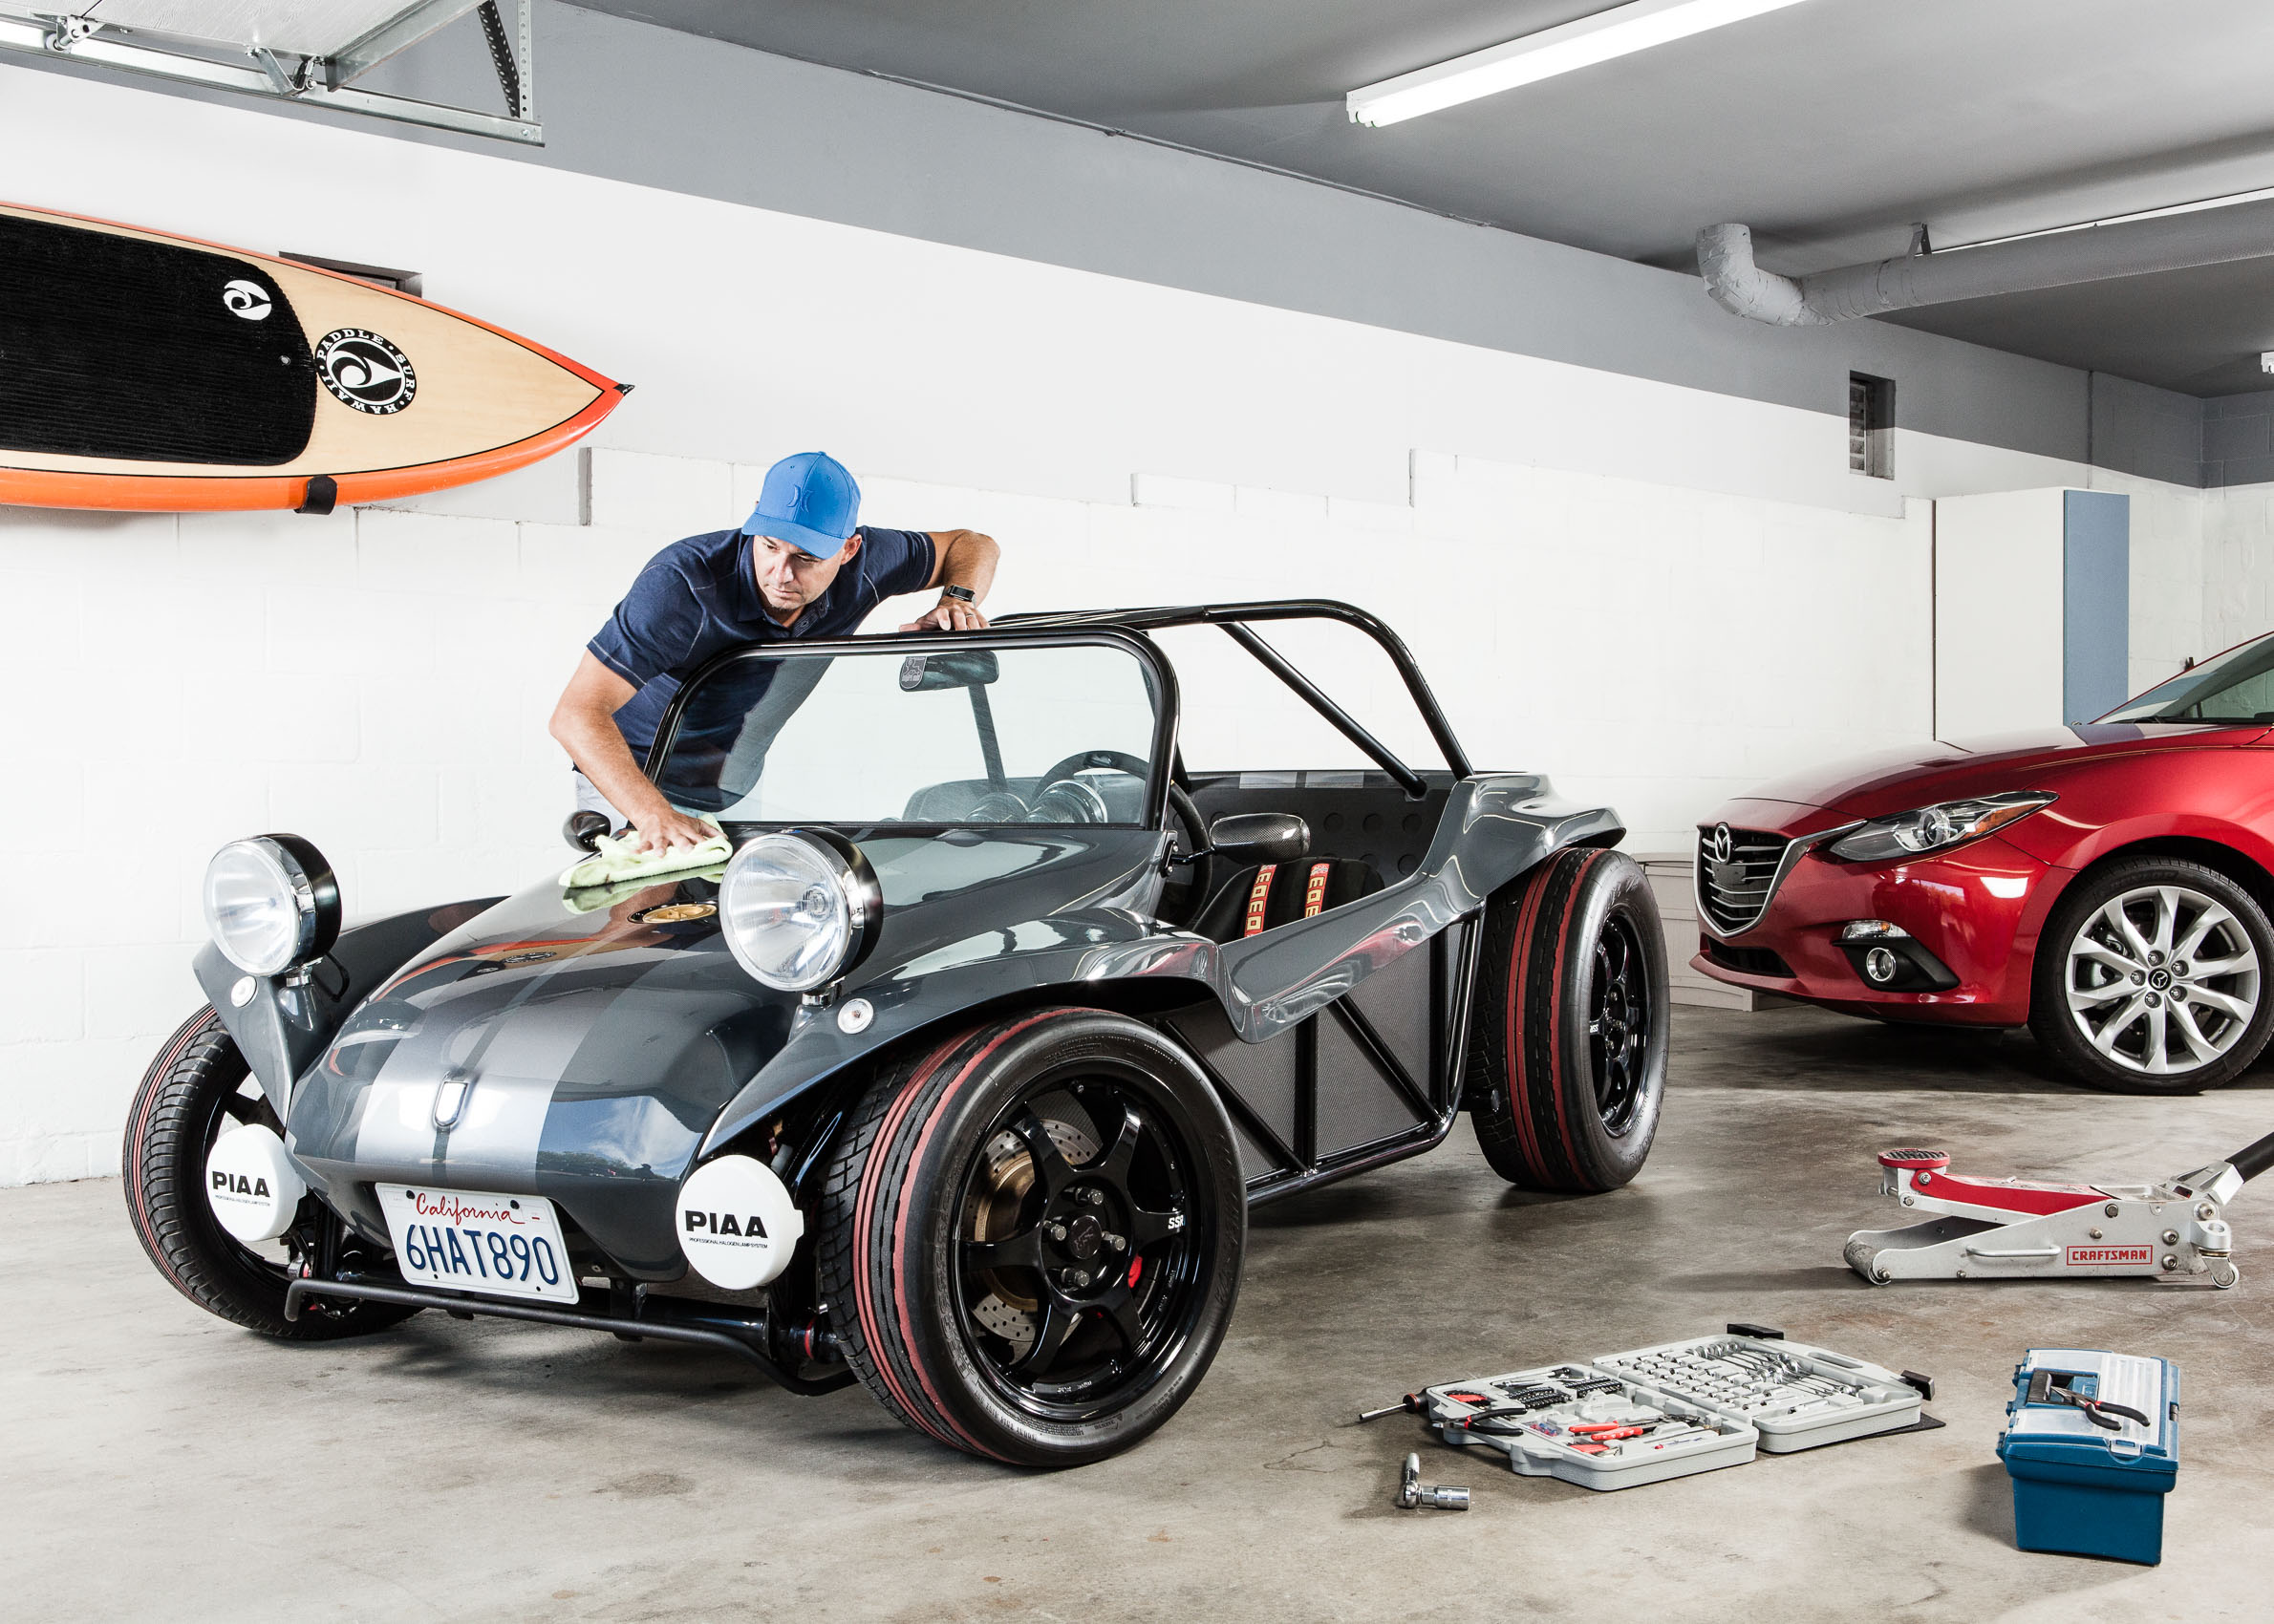 Derek Jenkins, Mazda design director & maker of a custom Meyers Manx dune buggy. Meet the makers | Los Angeles | Editorial and Commercial Photographer Patrick Strattner